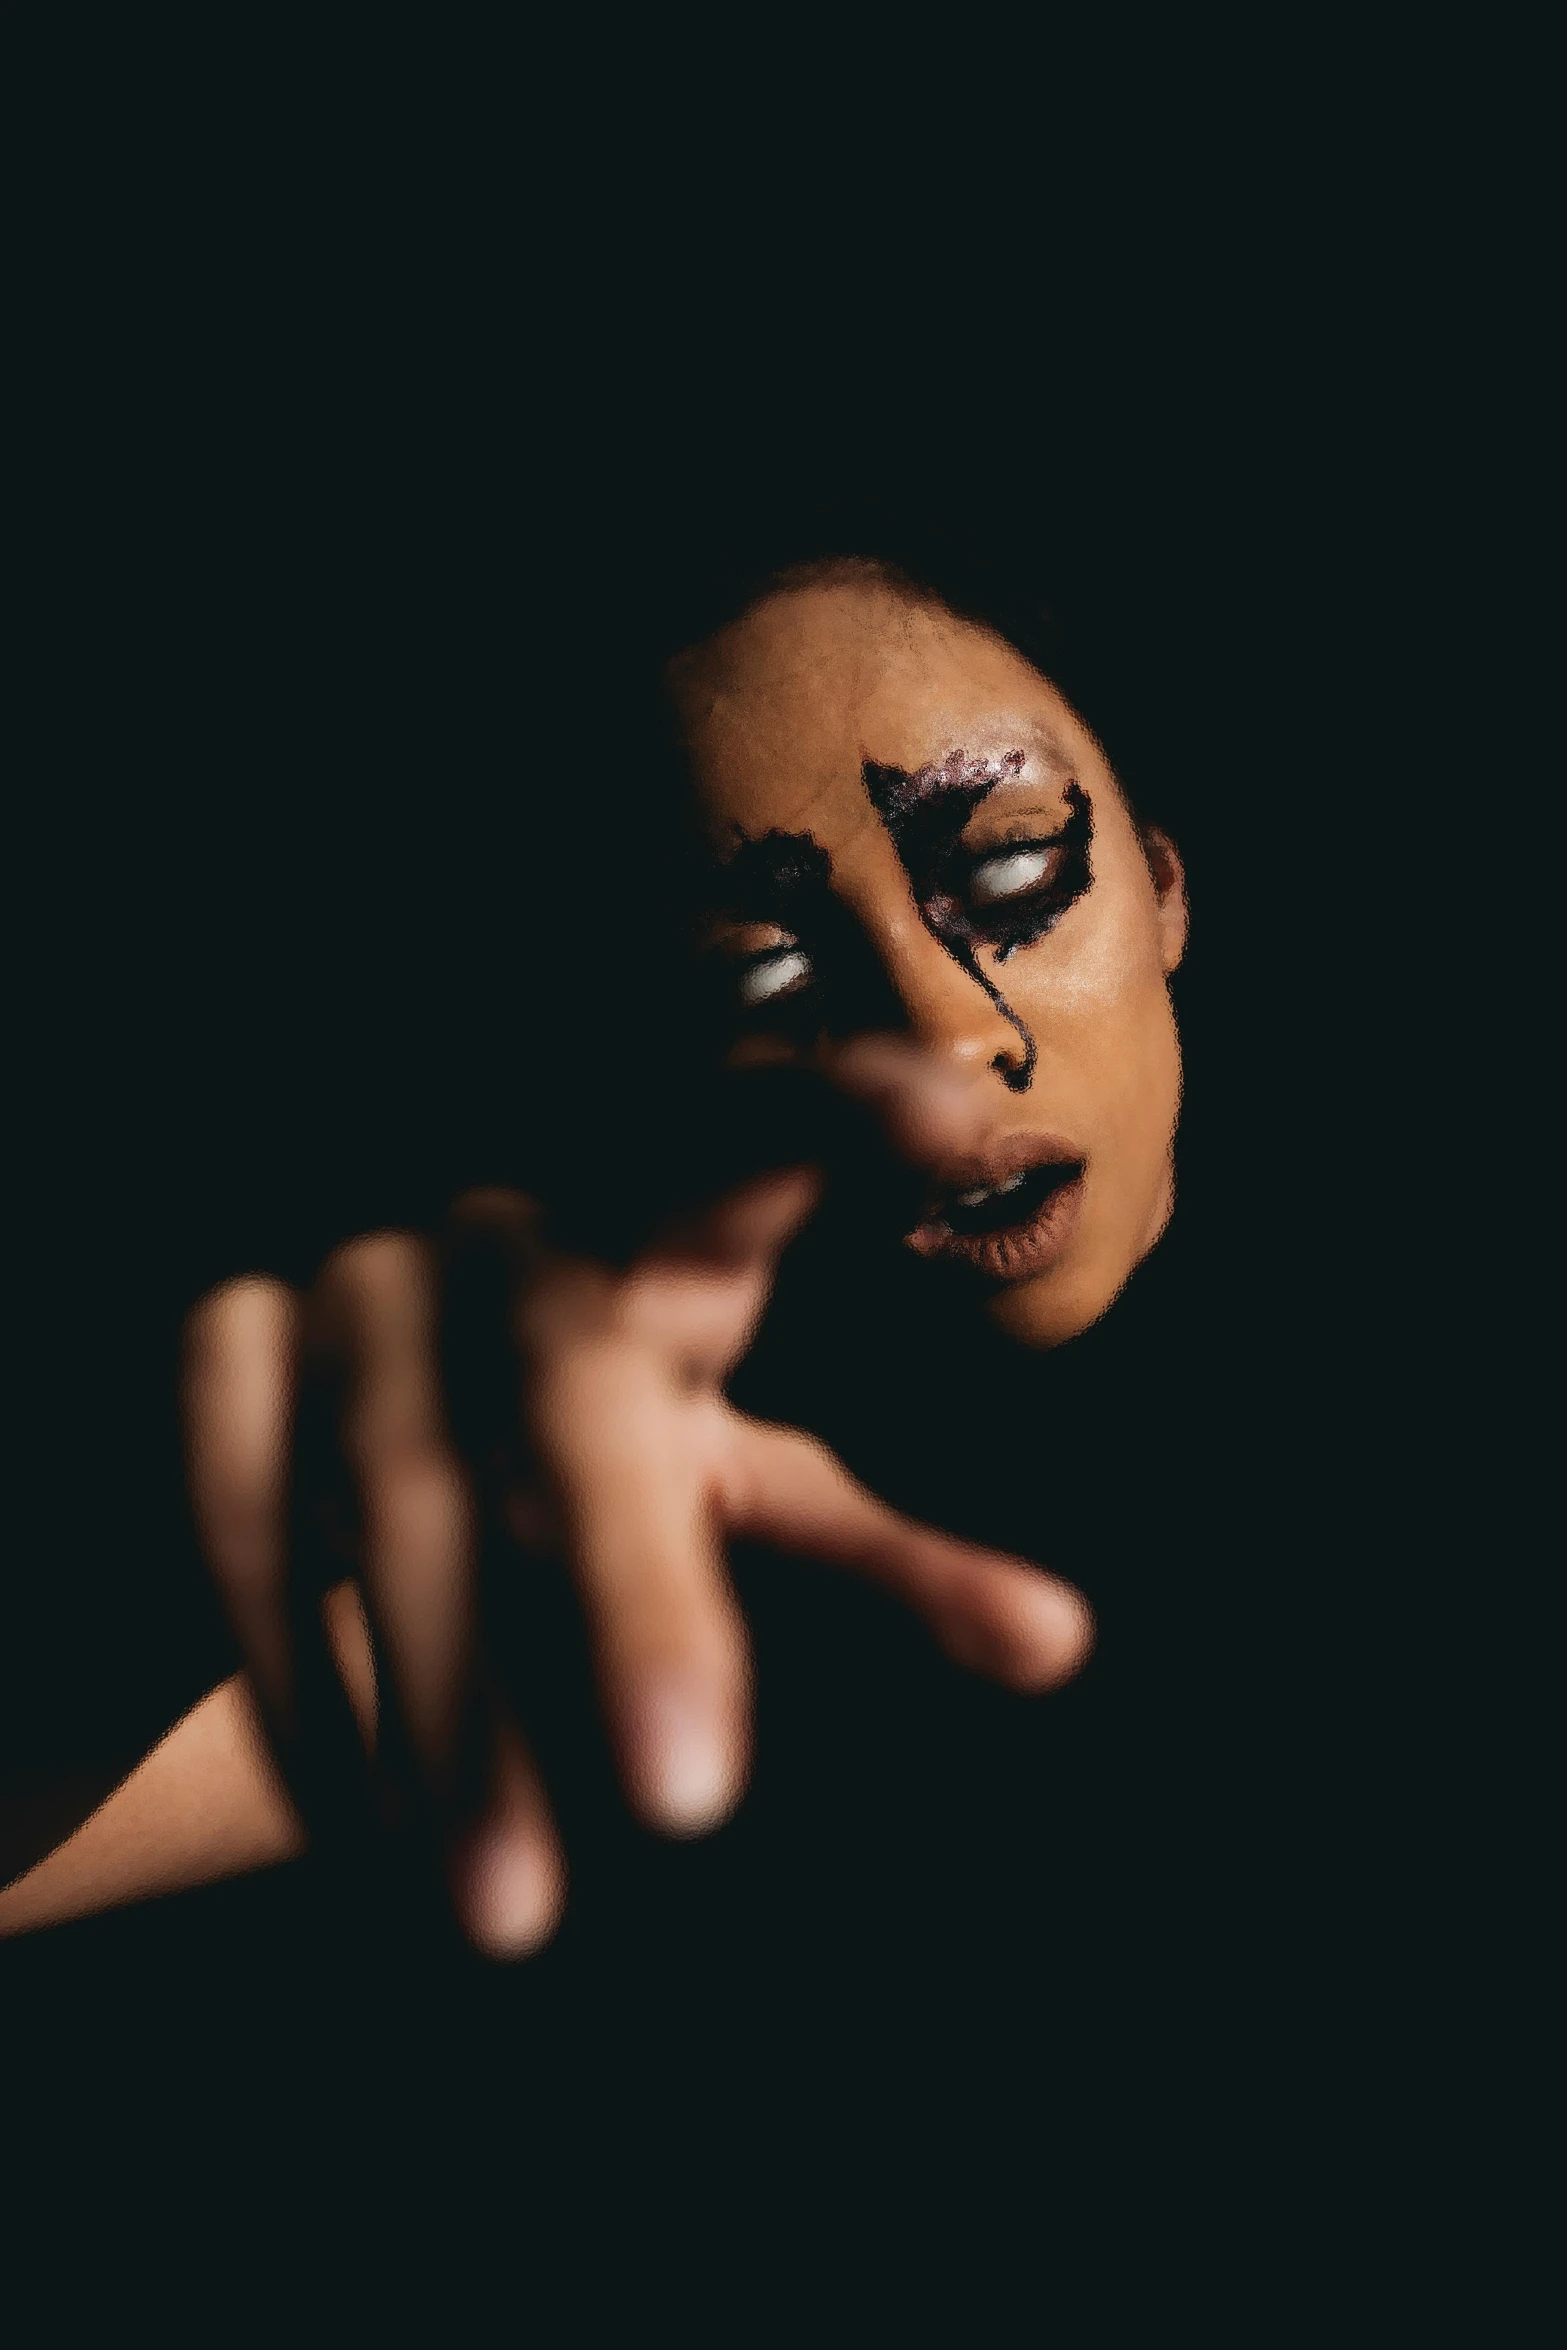 a close up of a person with a face painted, an album cover, inspired by Taro Yamamoto, unsplash, antipodeans, hands reaching for her, portrait of vanessa morgan, scary angry pose, dark ballerina